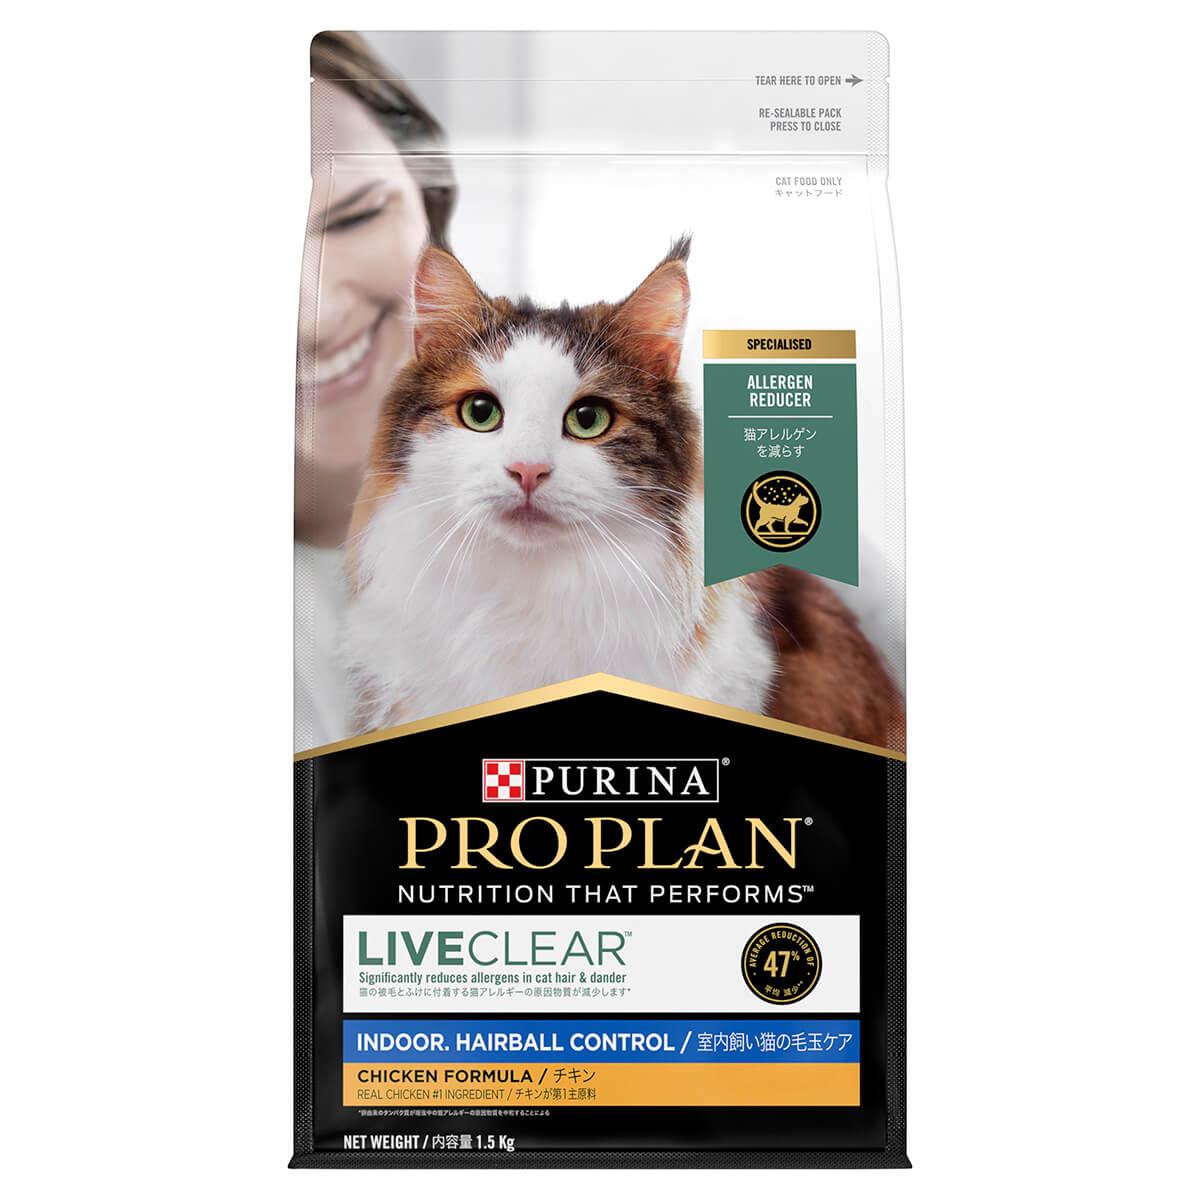 Pro Plan Live Clear Indoor Adult Hairball Control Dry Cat Food